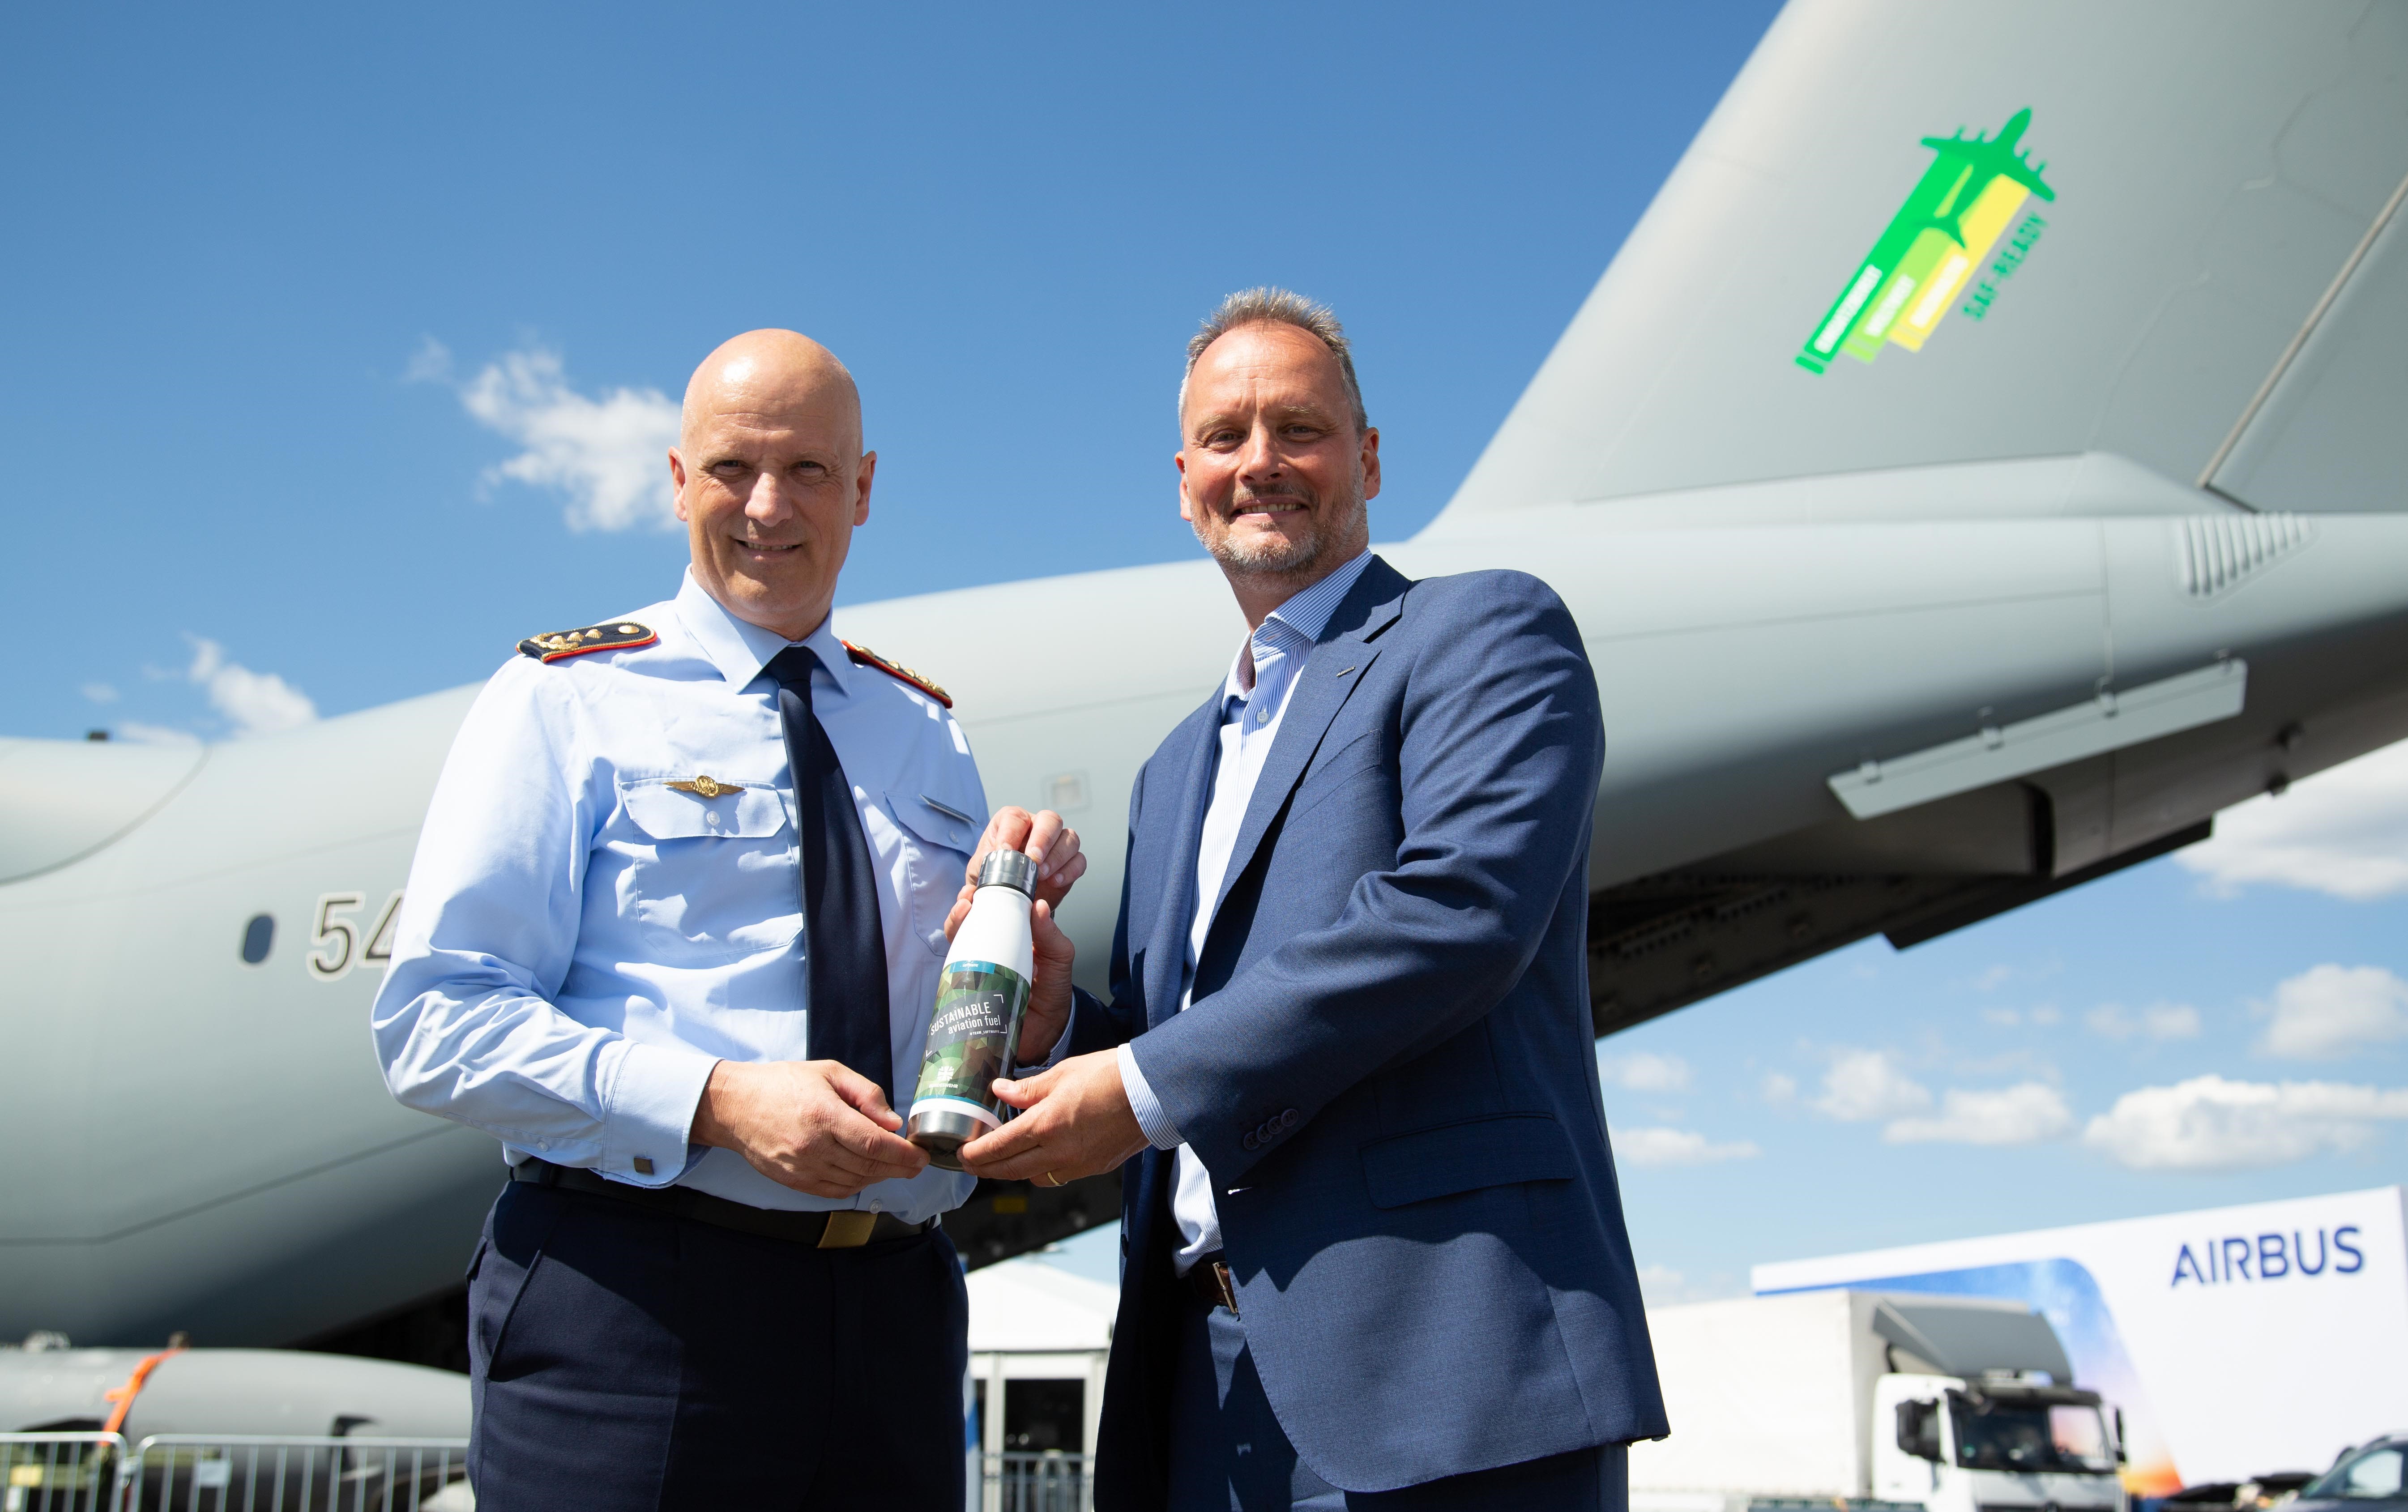 Mike Schoellhorn, Chief Executive Officer of Airbus Defence and Space, handing over a bottle of water to Lt.Gen. Ingo Gerhartz, Chief of the German Air Force, as a symbolic gesture of the Airbus agreement supporting the German Air Force in their long-term transformation to increase sustainability of its aircraft fleet. 